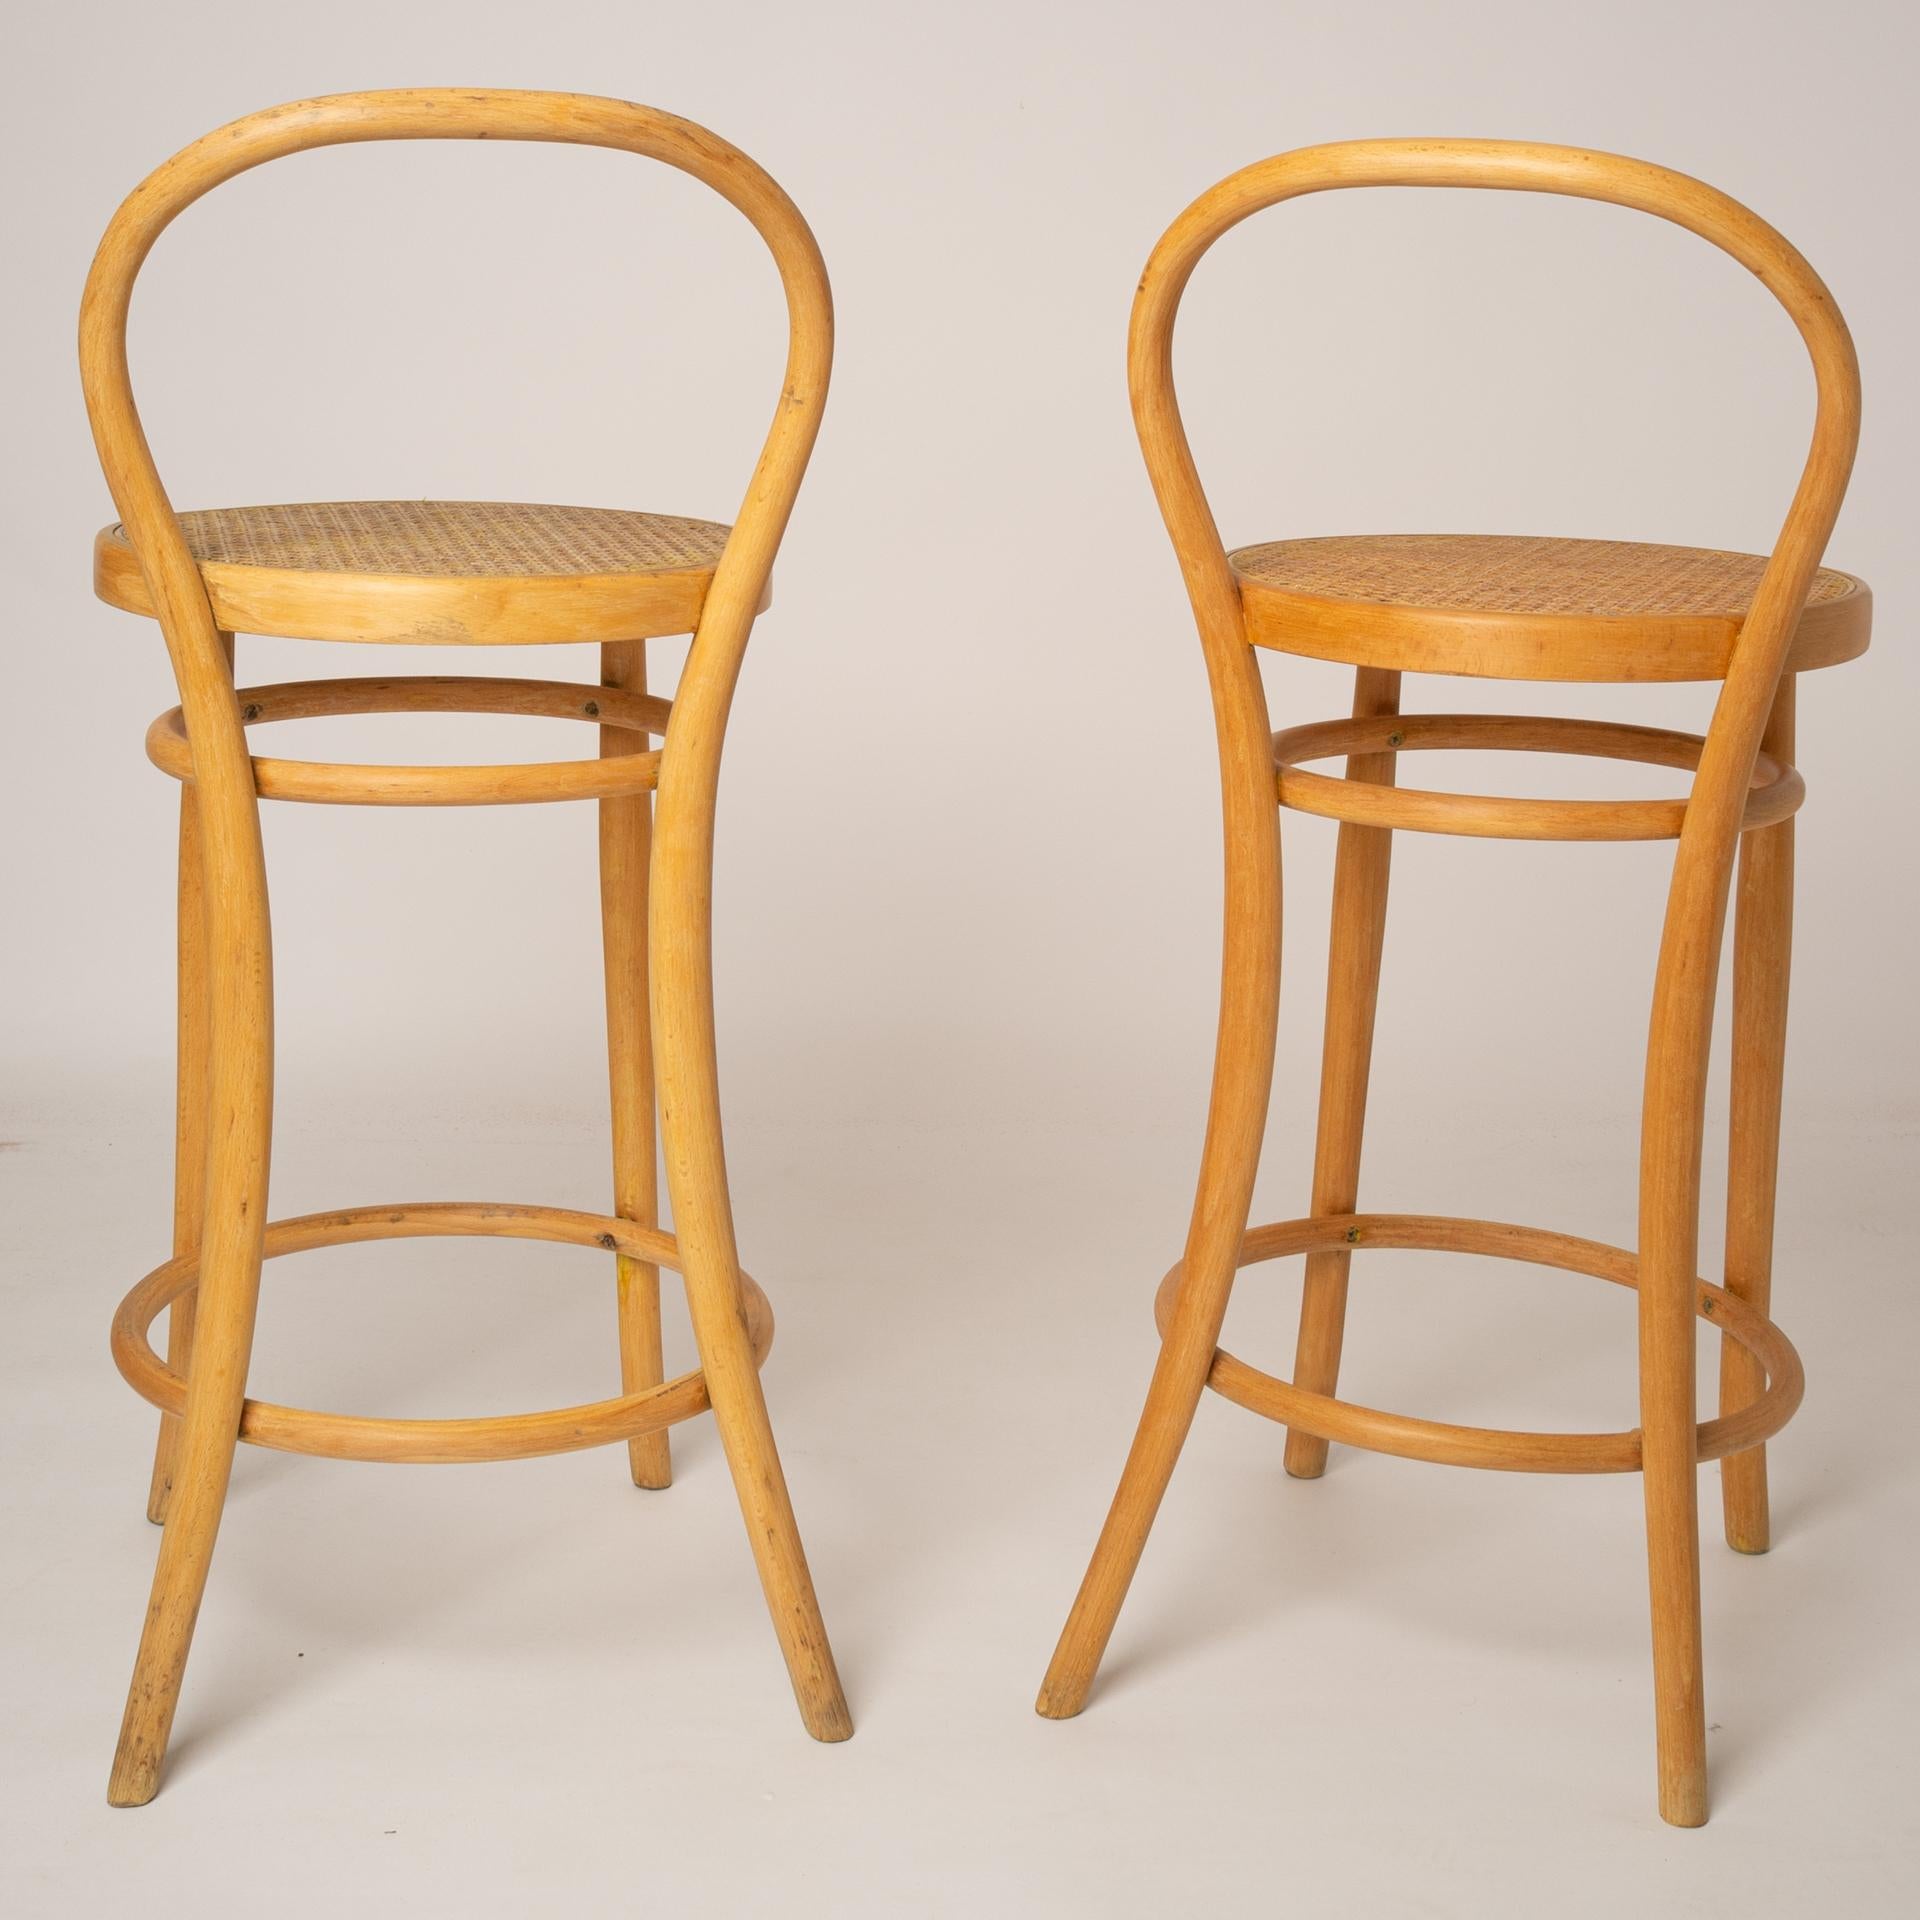 Italian High Bar Stools with Backrest In Excellent Condition For Sale In Alessandria, Piemonte